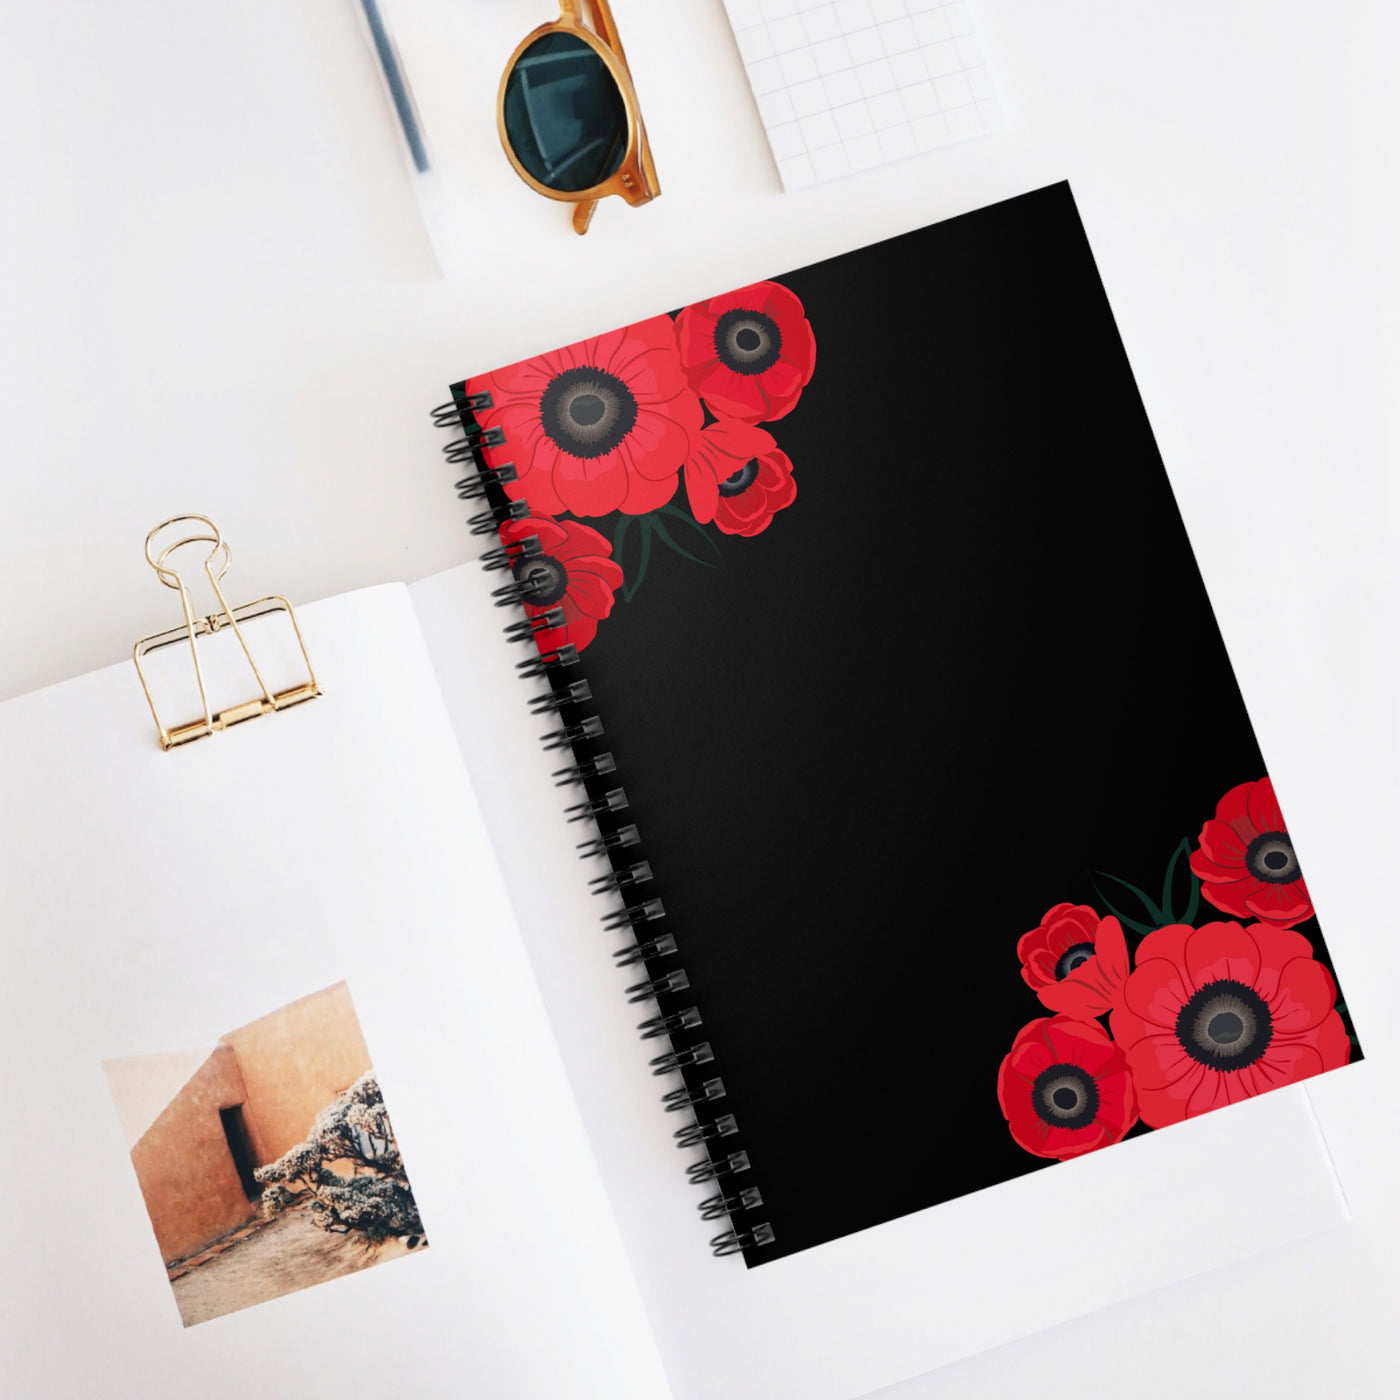 Tulips Spiral Notebook - Ruled Line